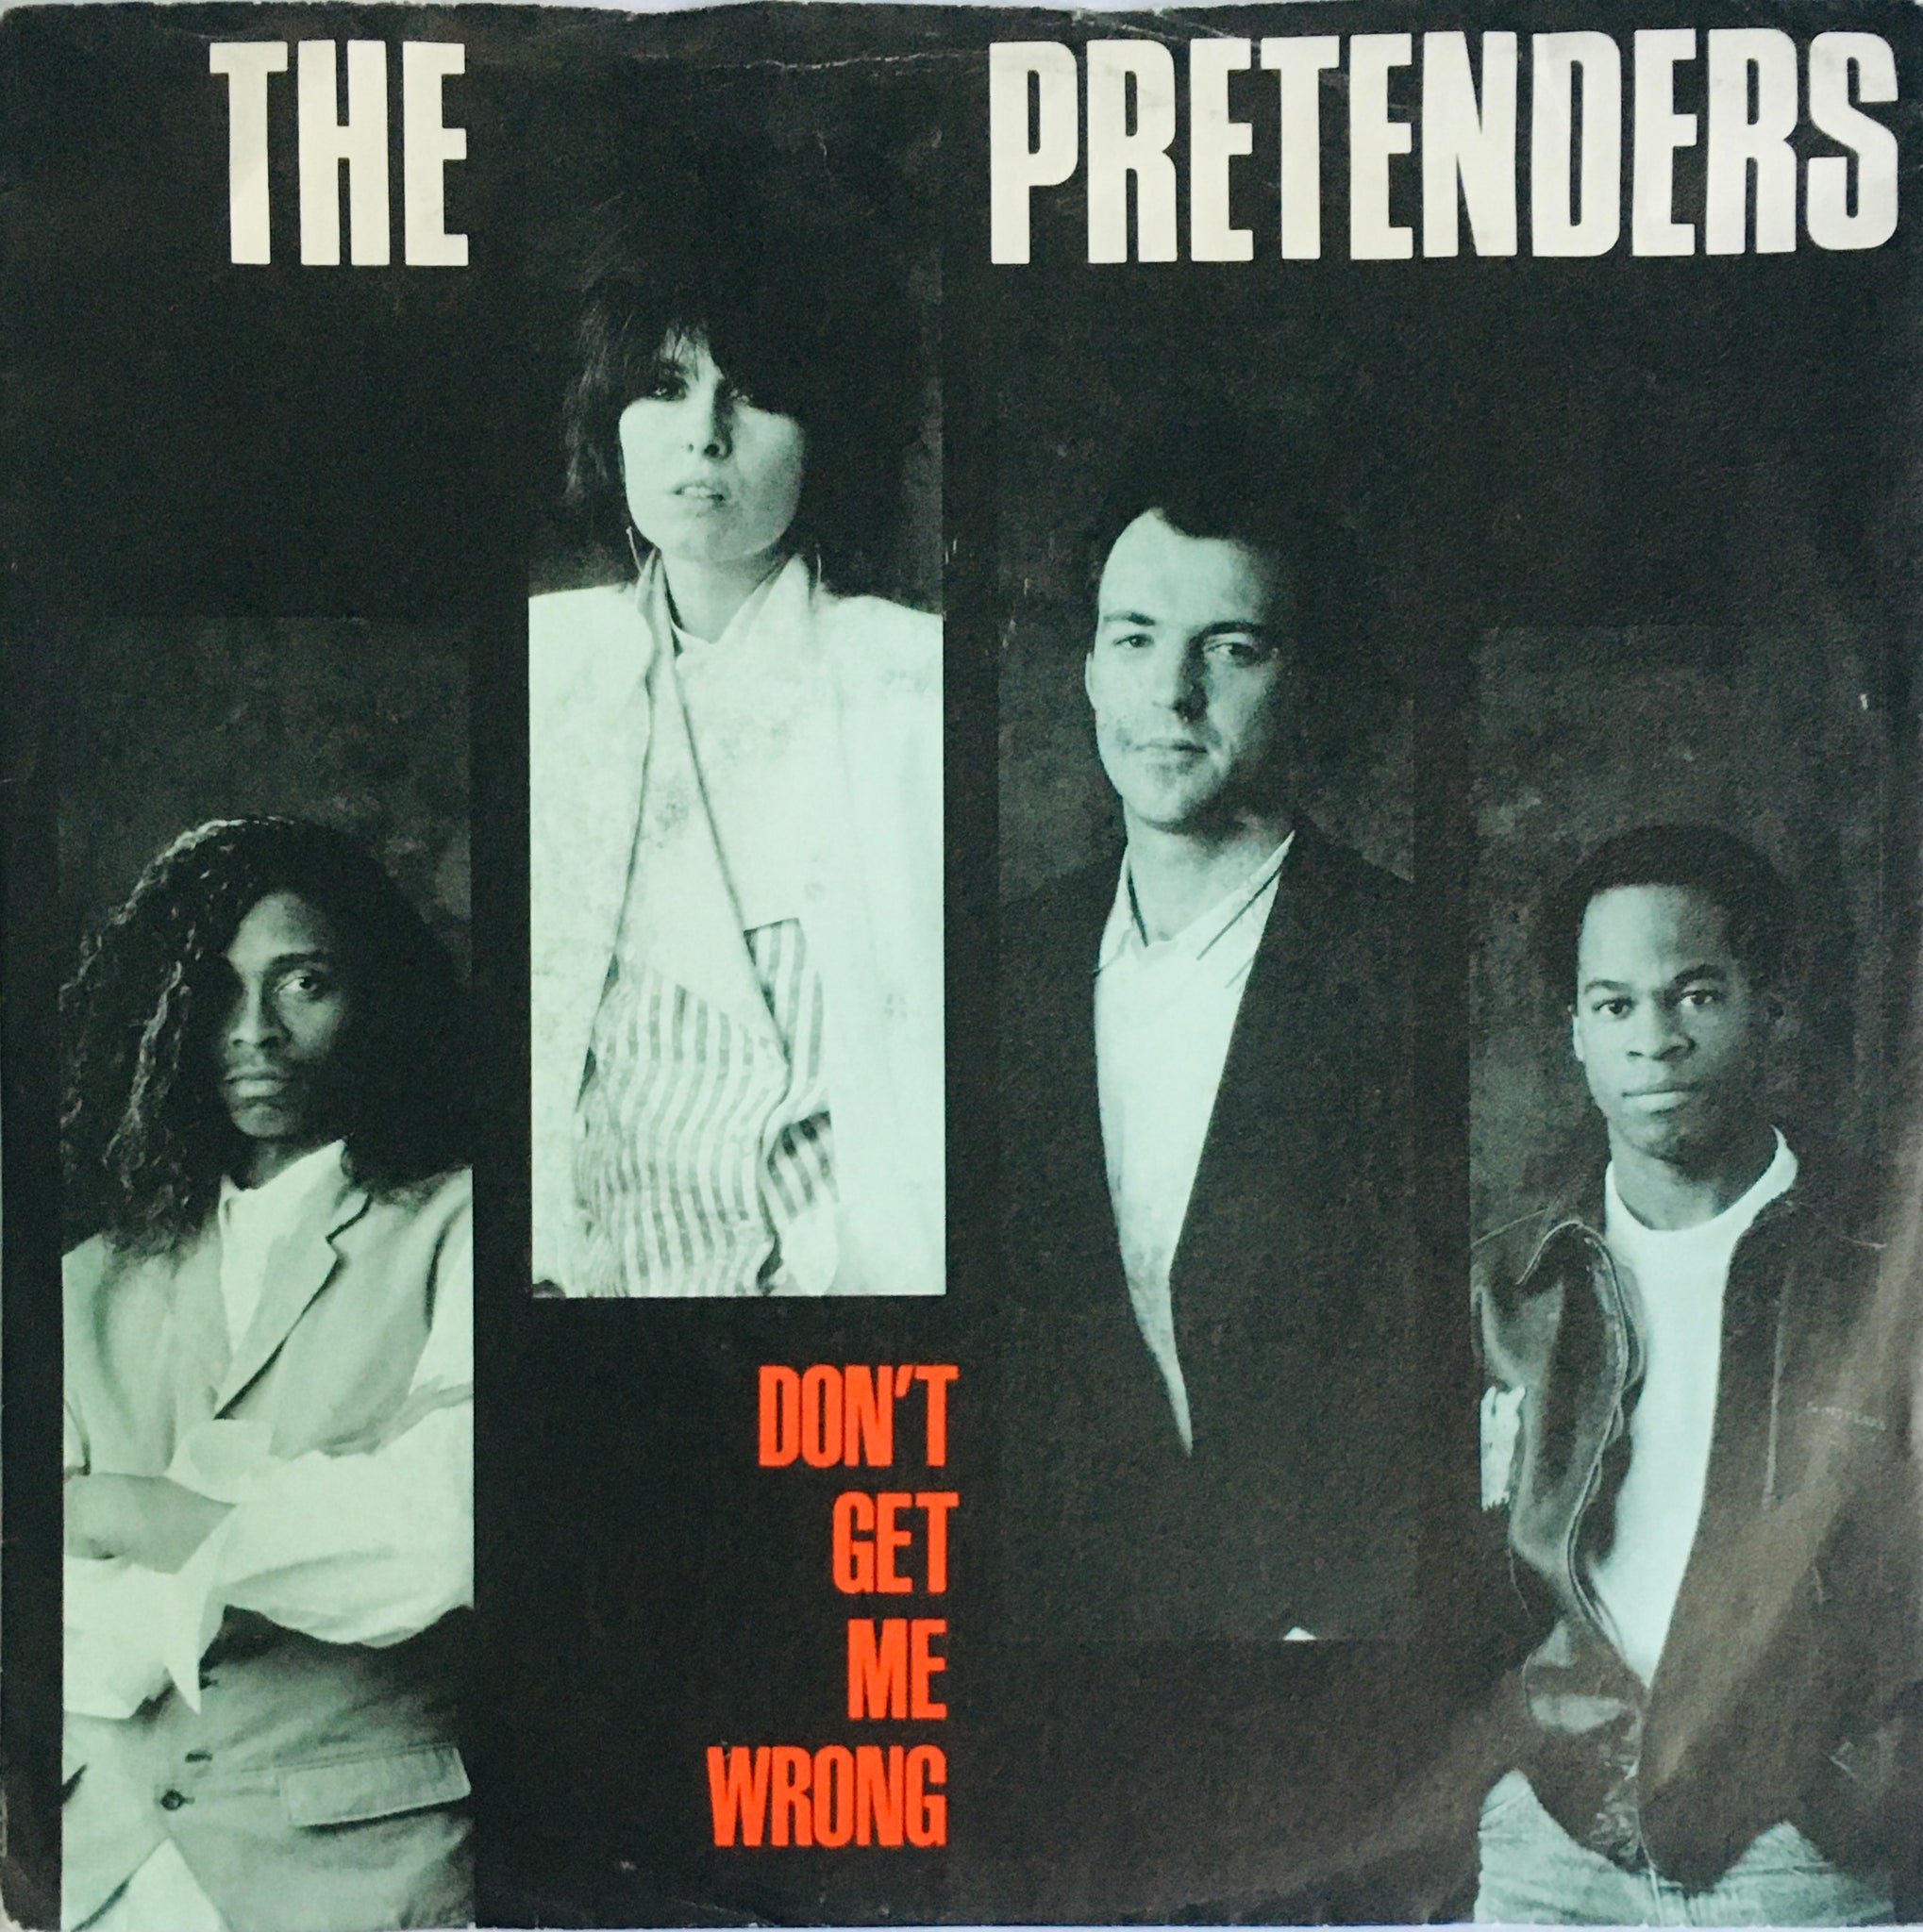 The Pretenders "Don't Get Me Wrong" Single (1986)